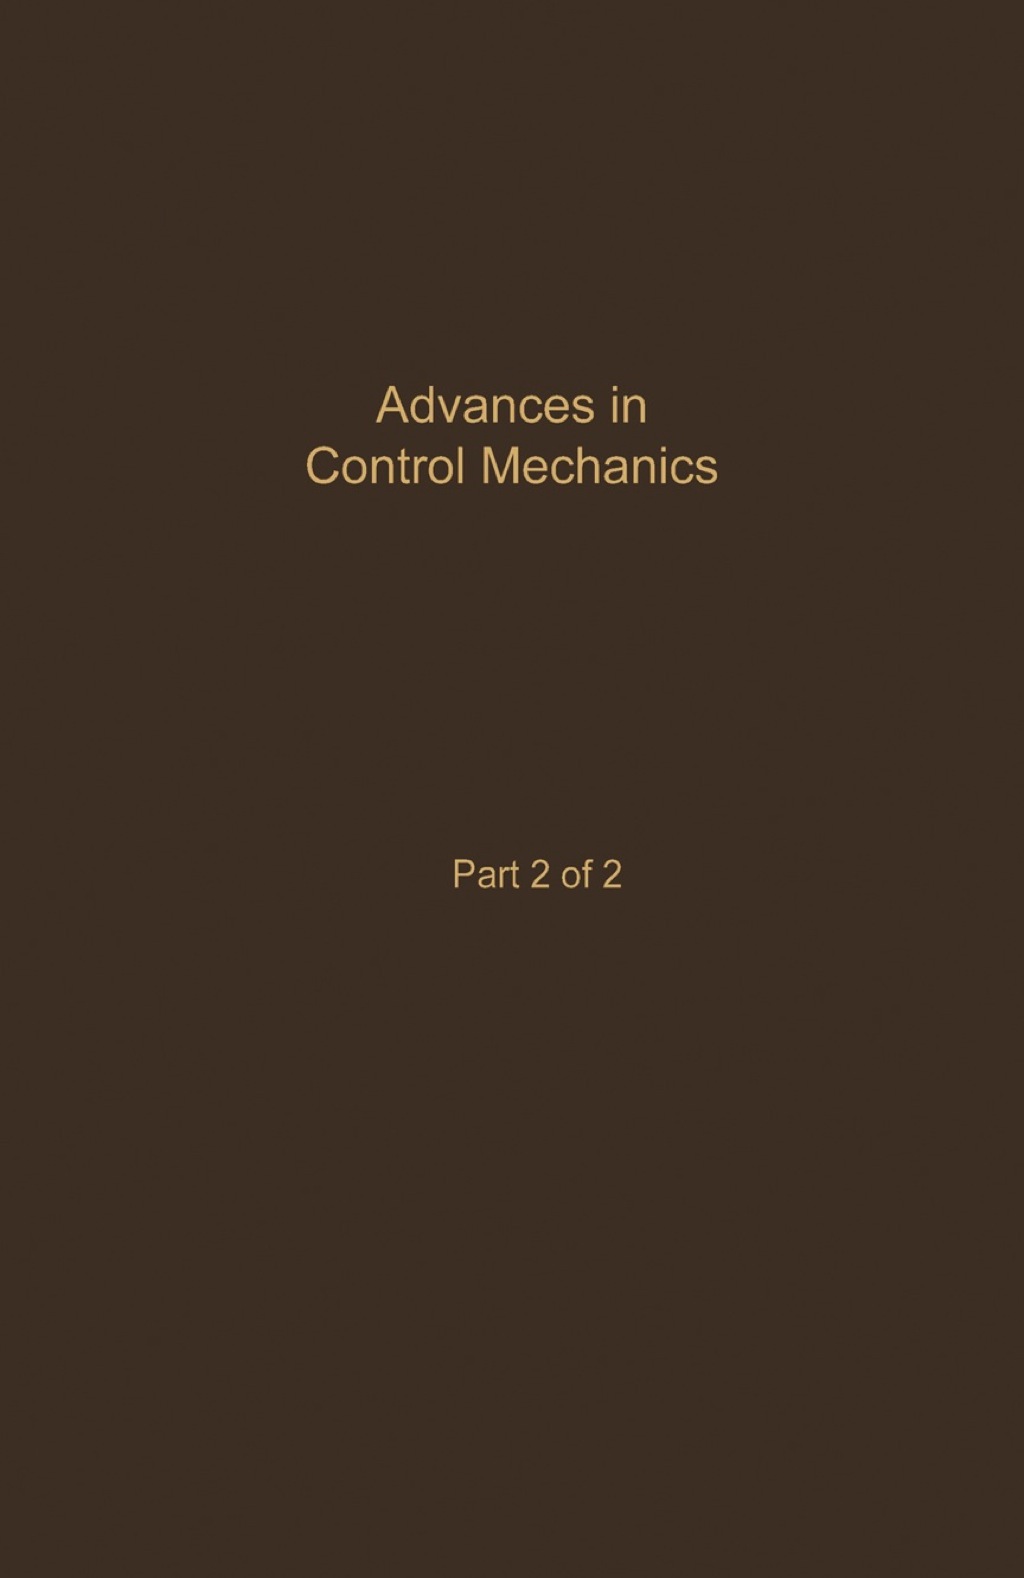 Control and Dynamic Systems V35: Advances in Control Mechanics Part 2 of 2: Advances in Theory and Applications (eBook) - Leonides,  C.T.